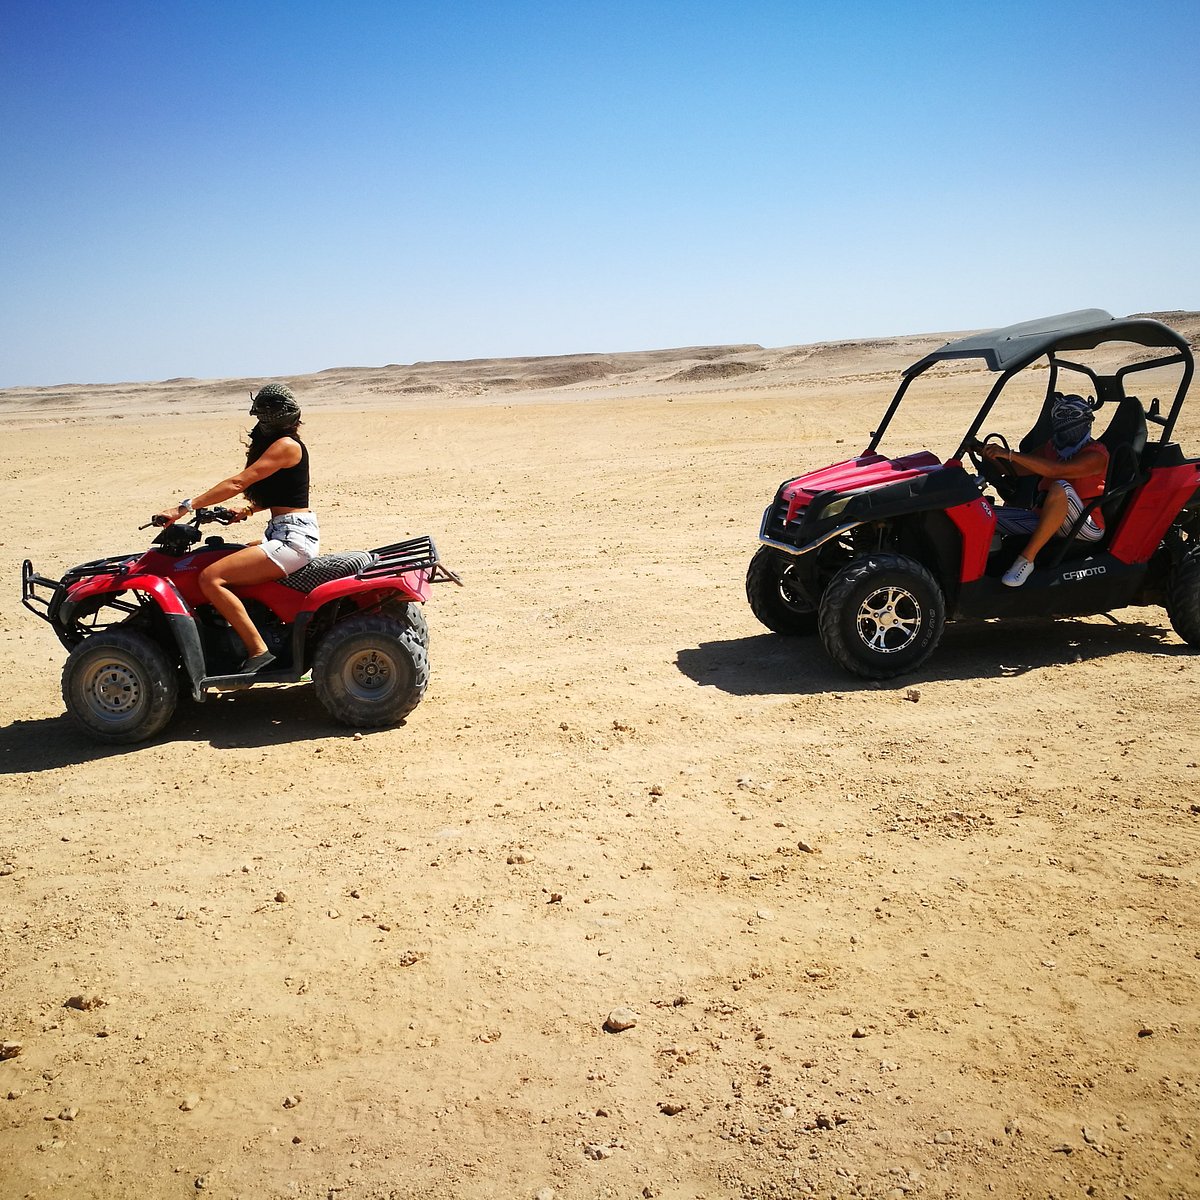 Crystal Safari Hurghada - All You Need to Know BEFORE You Go